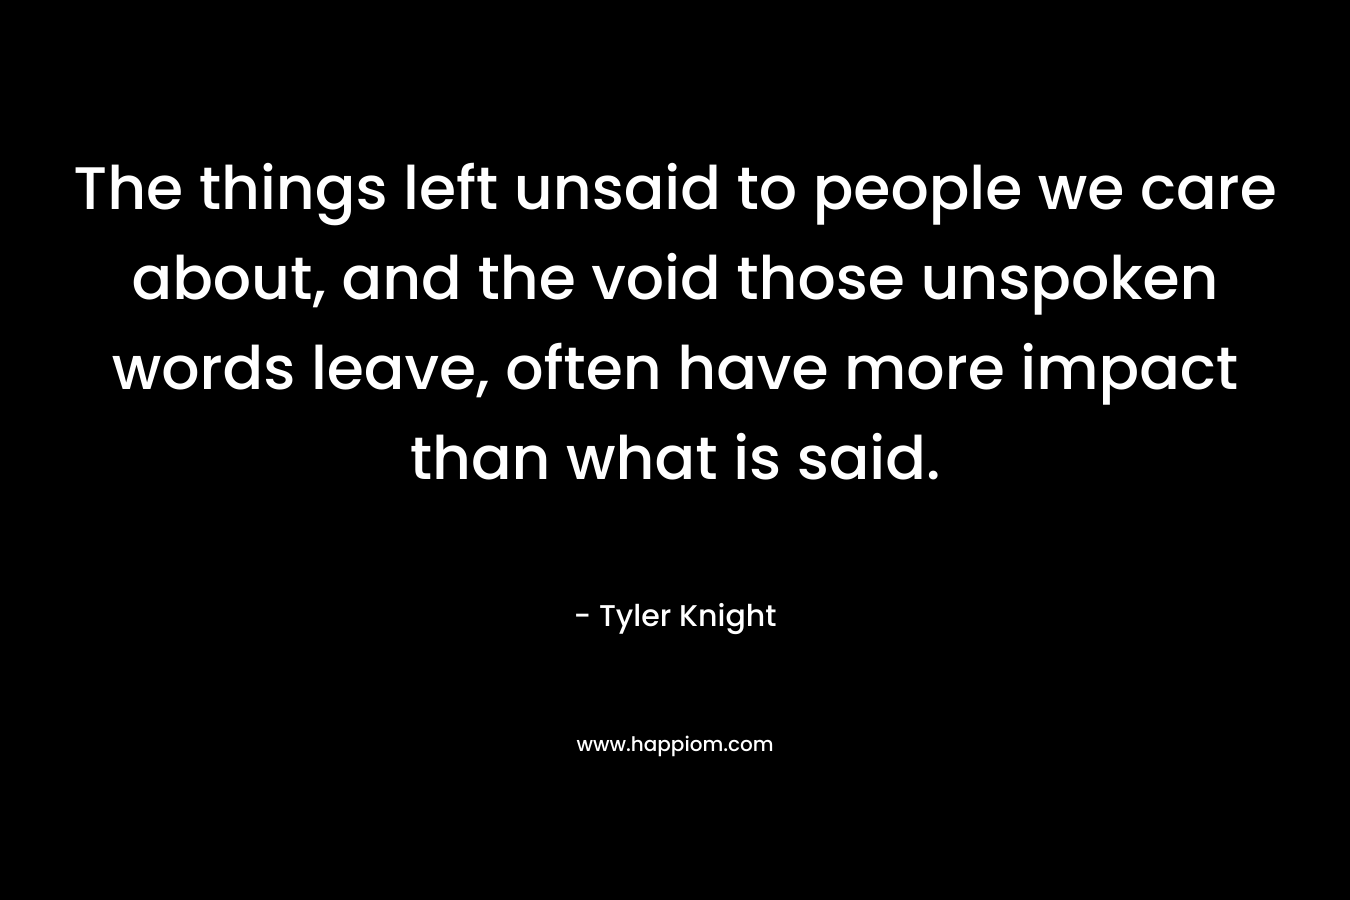 The things left unsaid to people we care about, and the void those unspoken words leave, often have more impact than what is said.